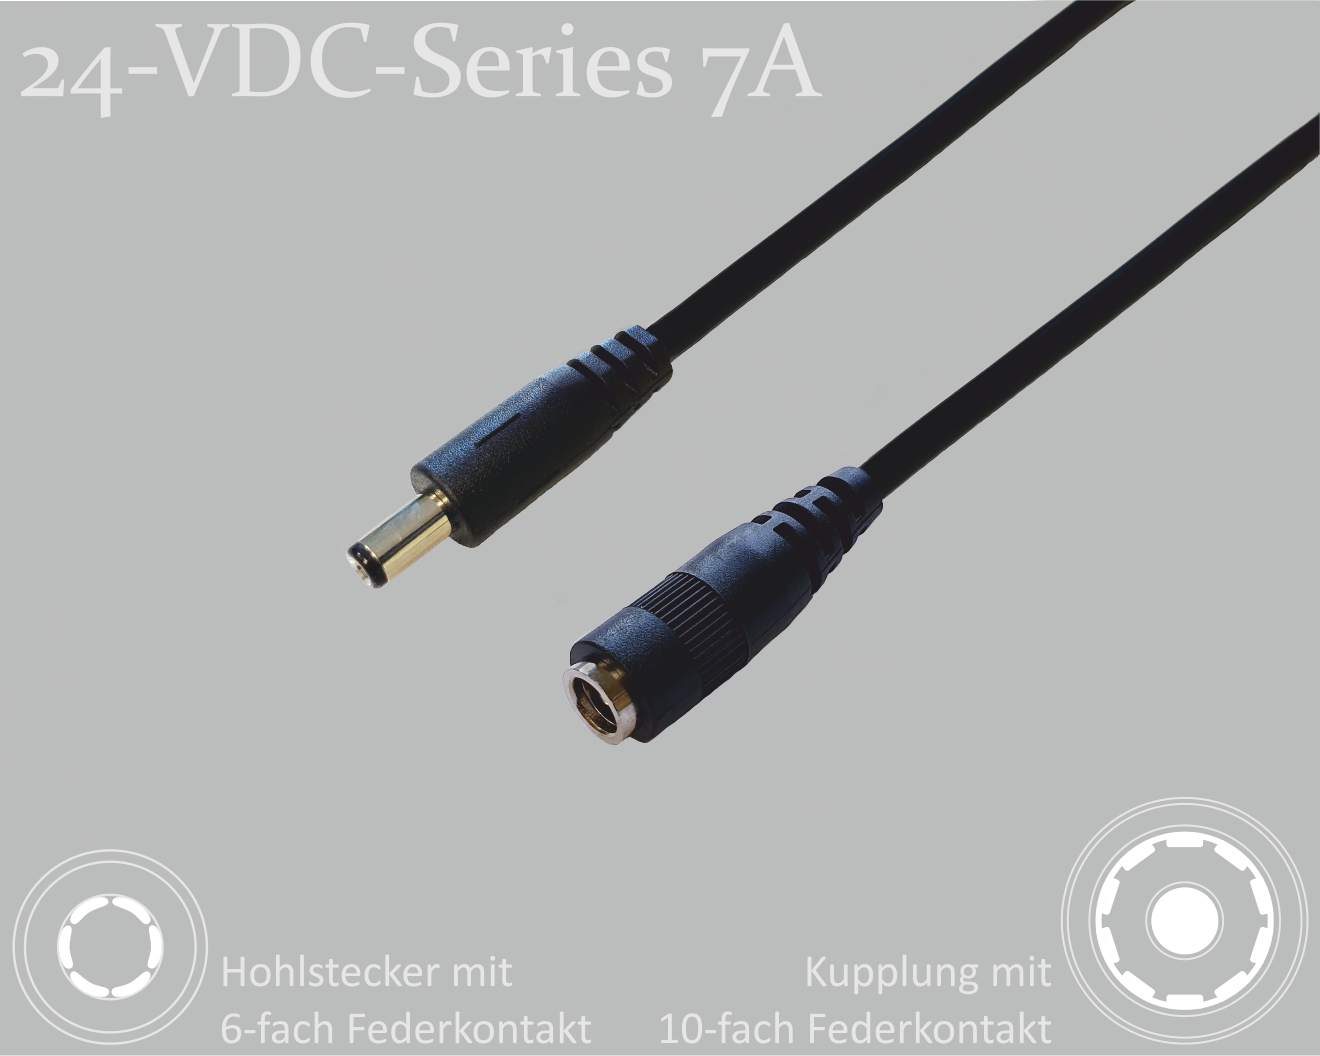 24-VDC-Series 7A, DC extension cable, DC plug with 4-spring contact 2.5x5.5x9.5mm to DC socket with 10-spring contact 2.5x5.5mm, round cable 2x0.50mm², black, 4 m